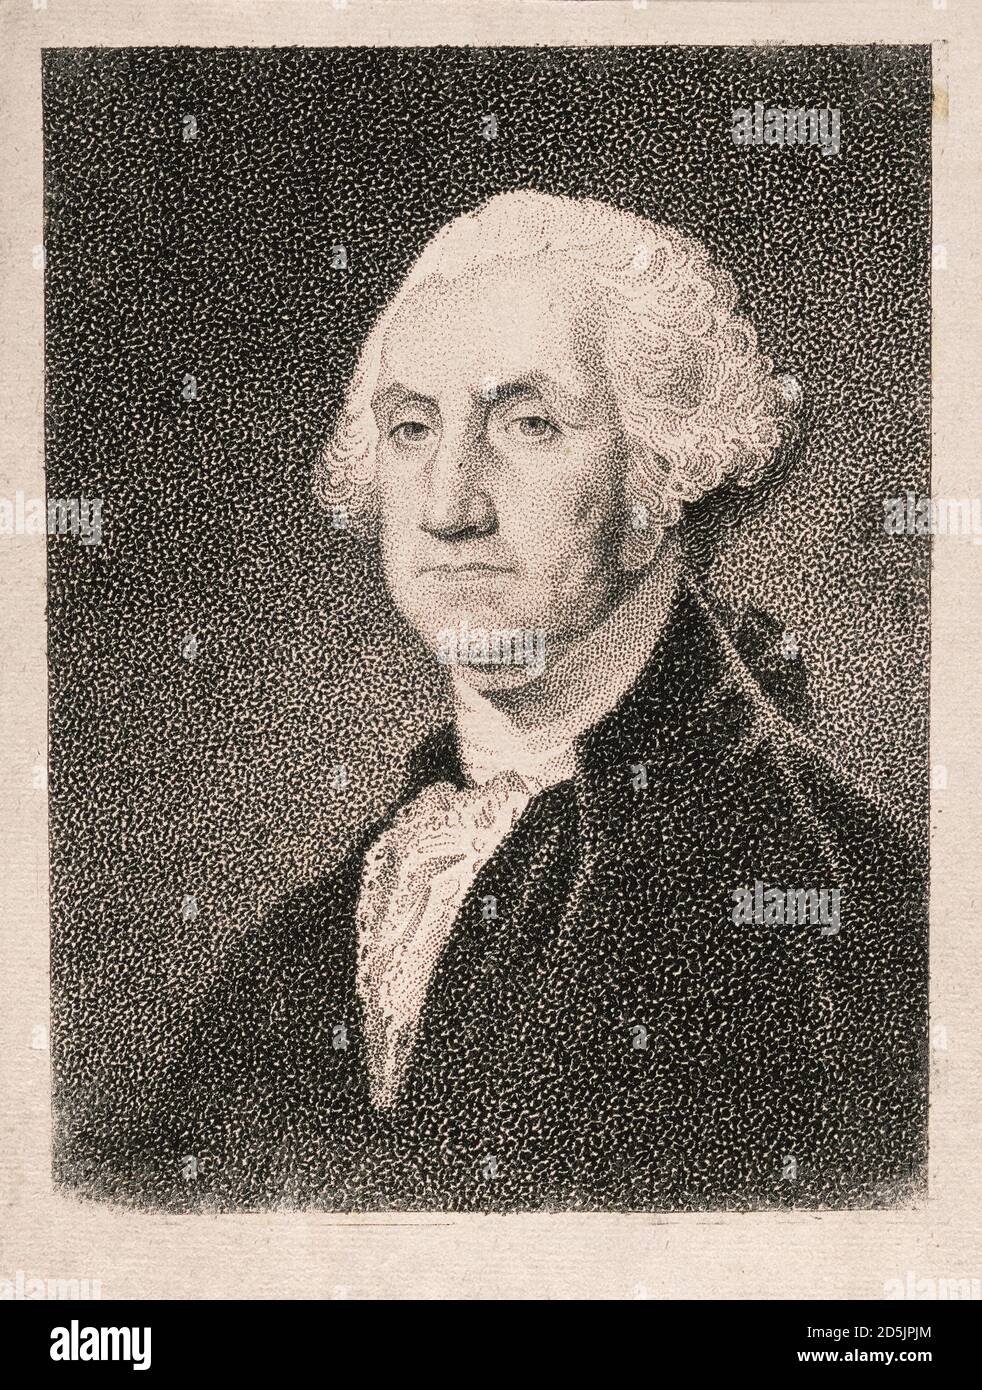 Portrait of president George Washington. George Washington (1732 – 1799) was an American political leader, military general, statesman, and founding f Stock Photo